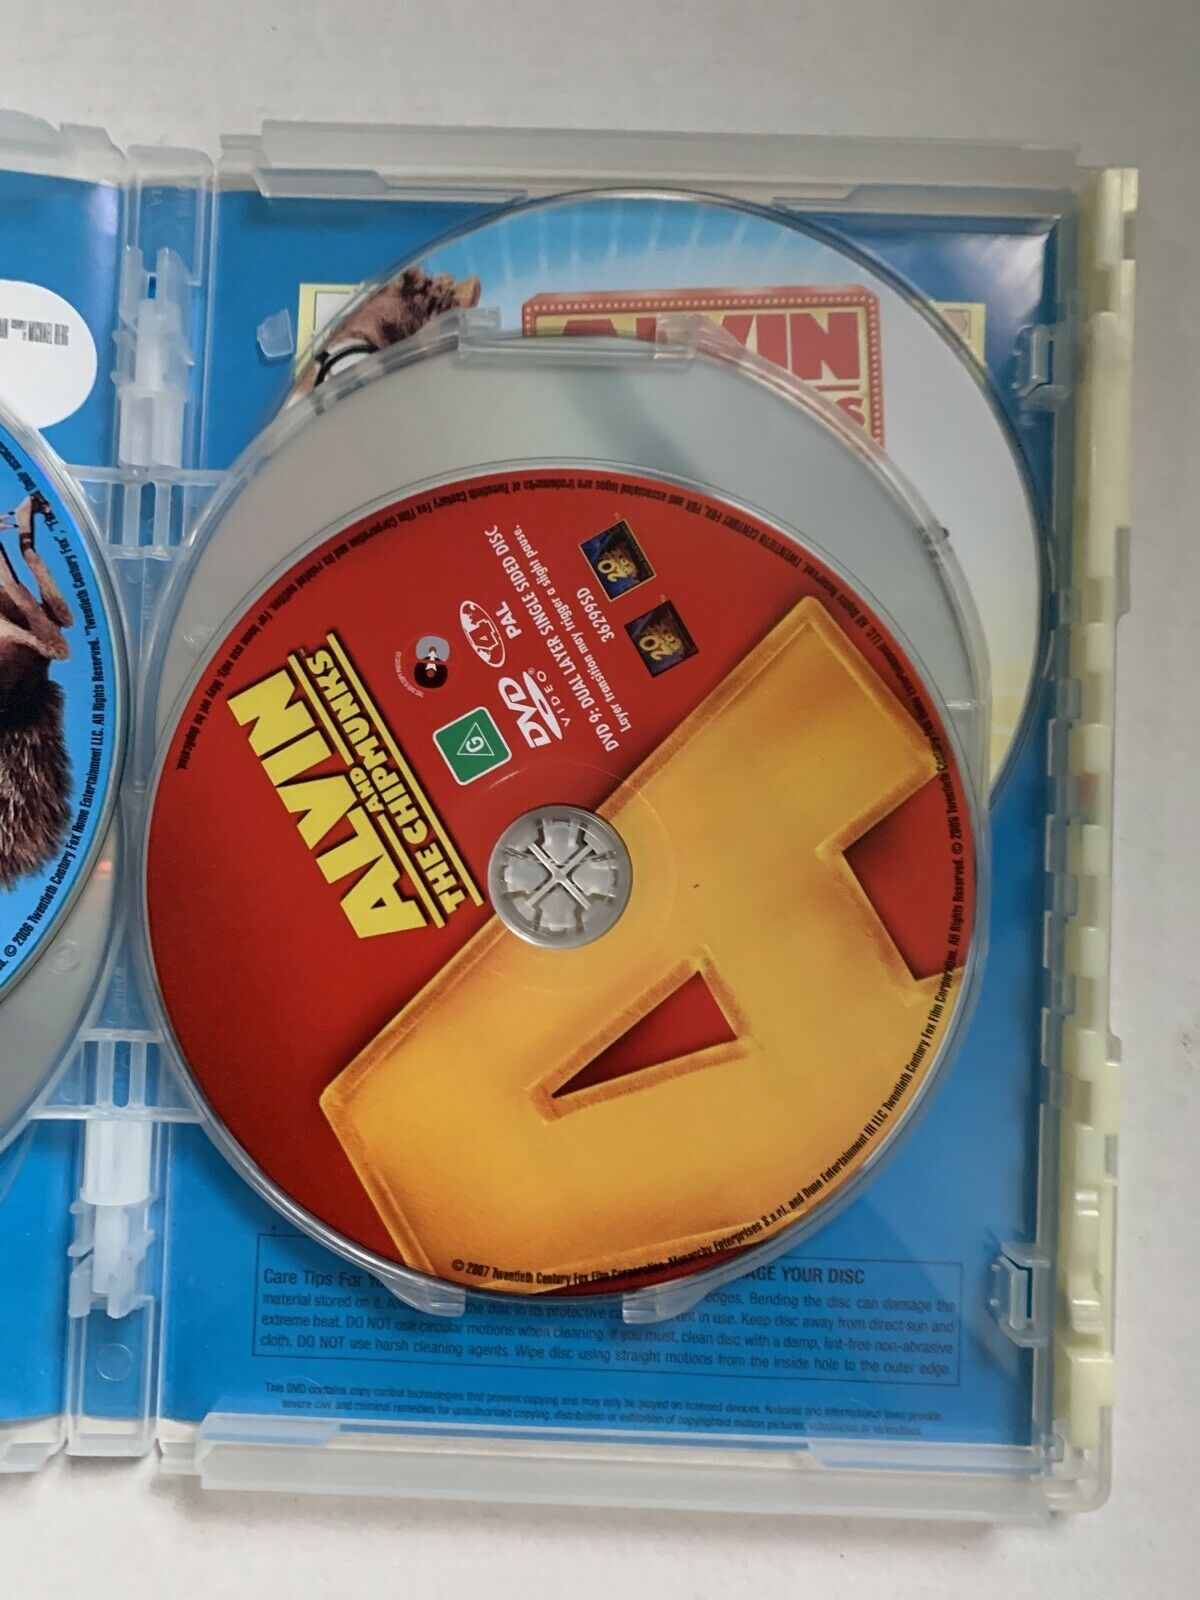 5 Movie DVDs: Ice Age 1&2, Alvin The Chipmunks & The Squeakquel, The Simpsons